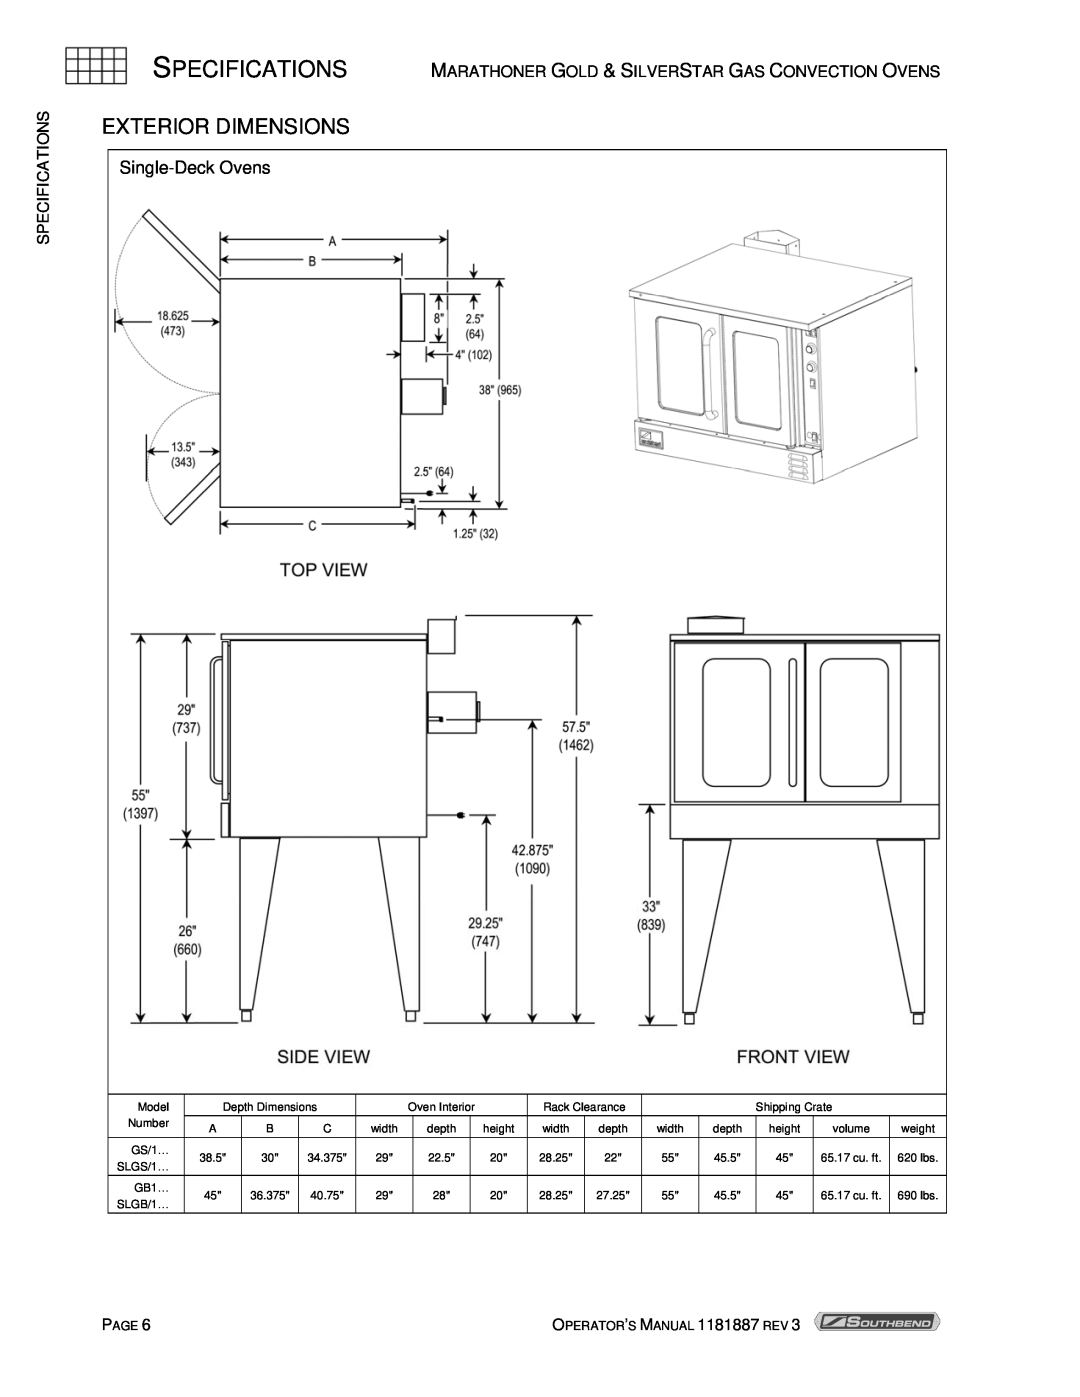 Southbend Marathoner manual Exterior Dimensions, Specifications, Single-Deck Ovens 